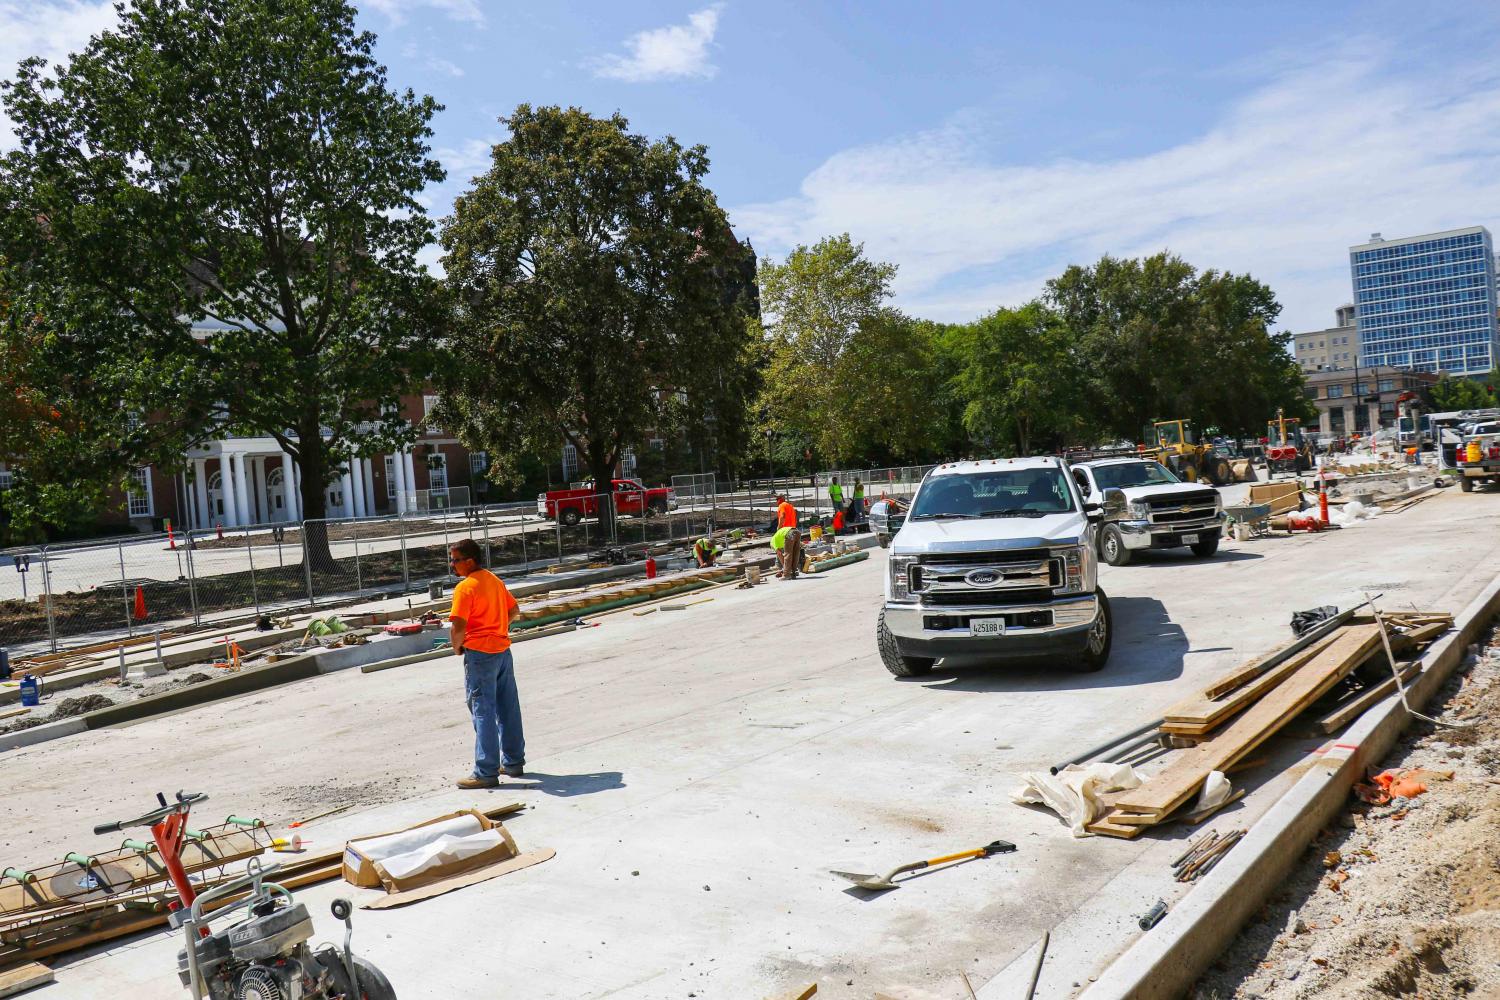 Changes from summer construction can be noticed around campus as students return